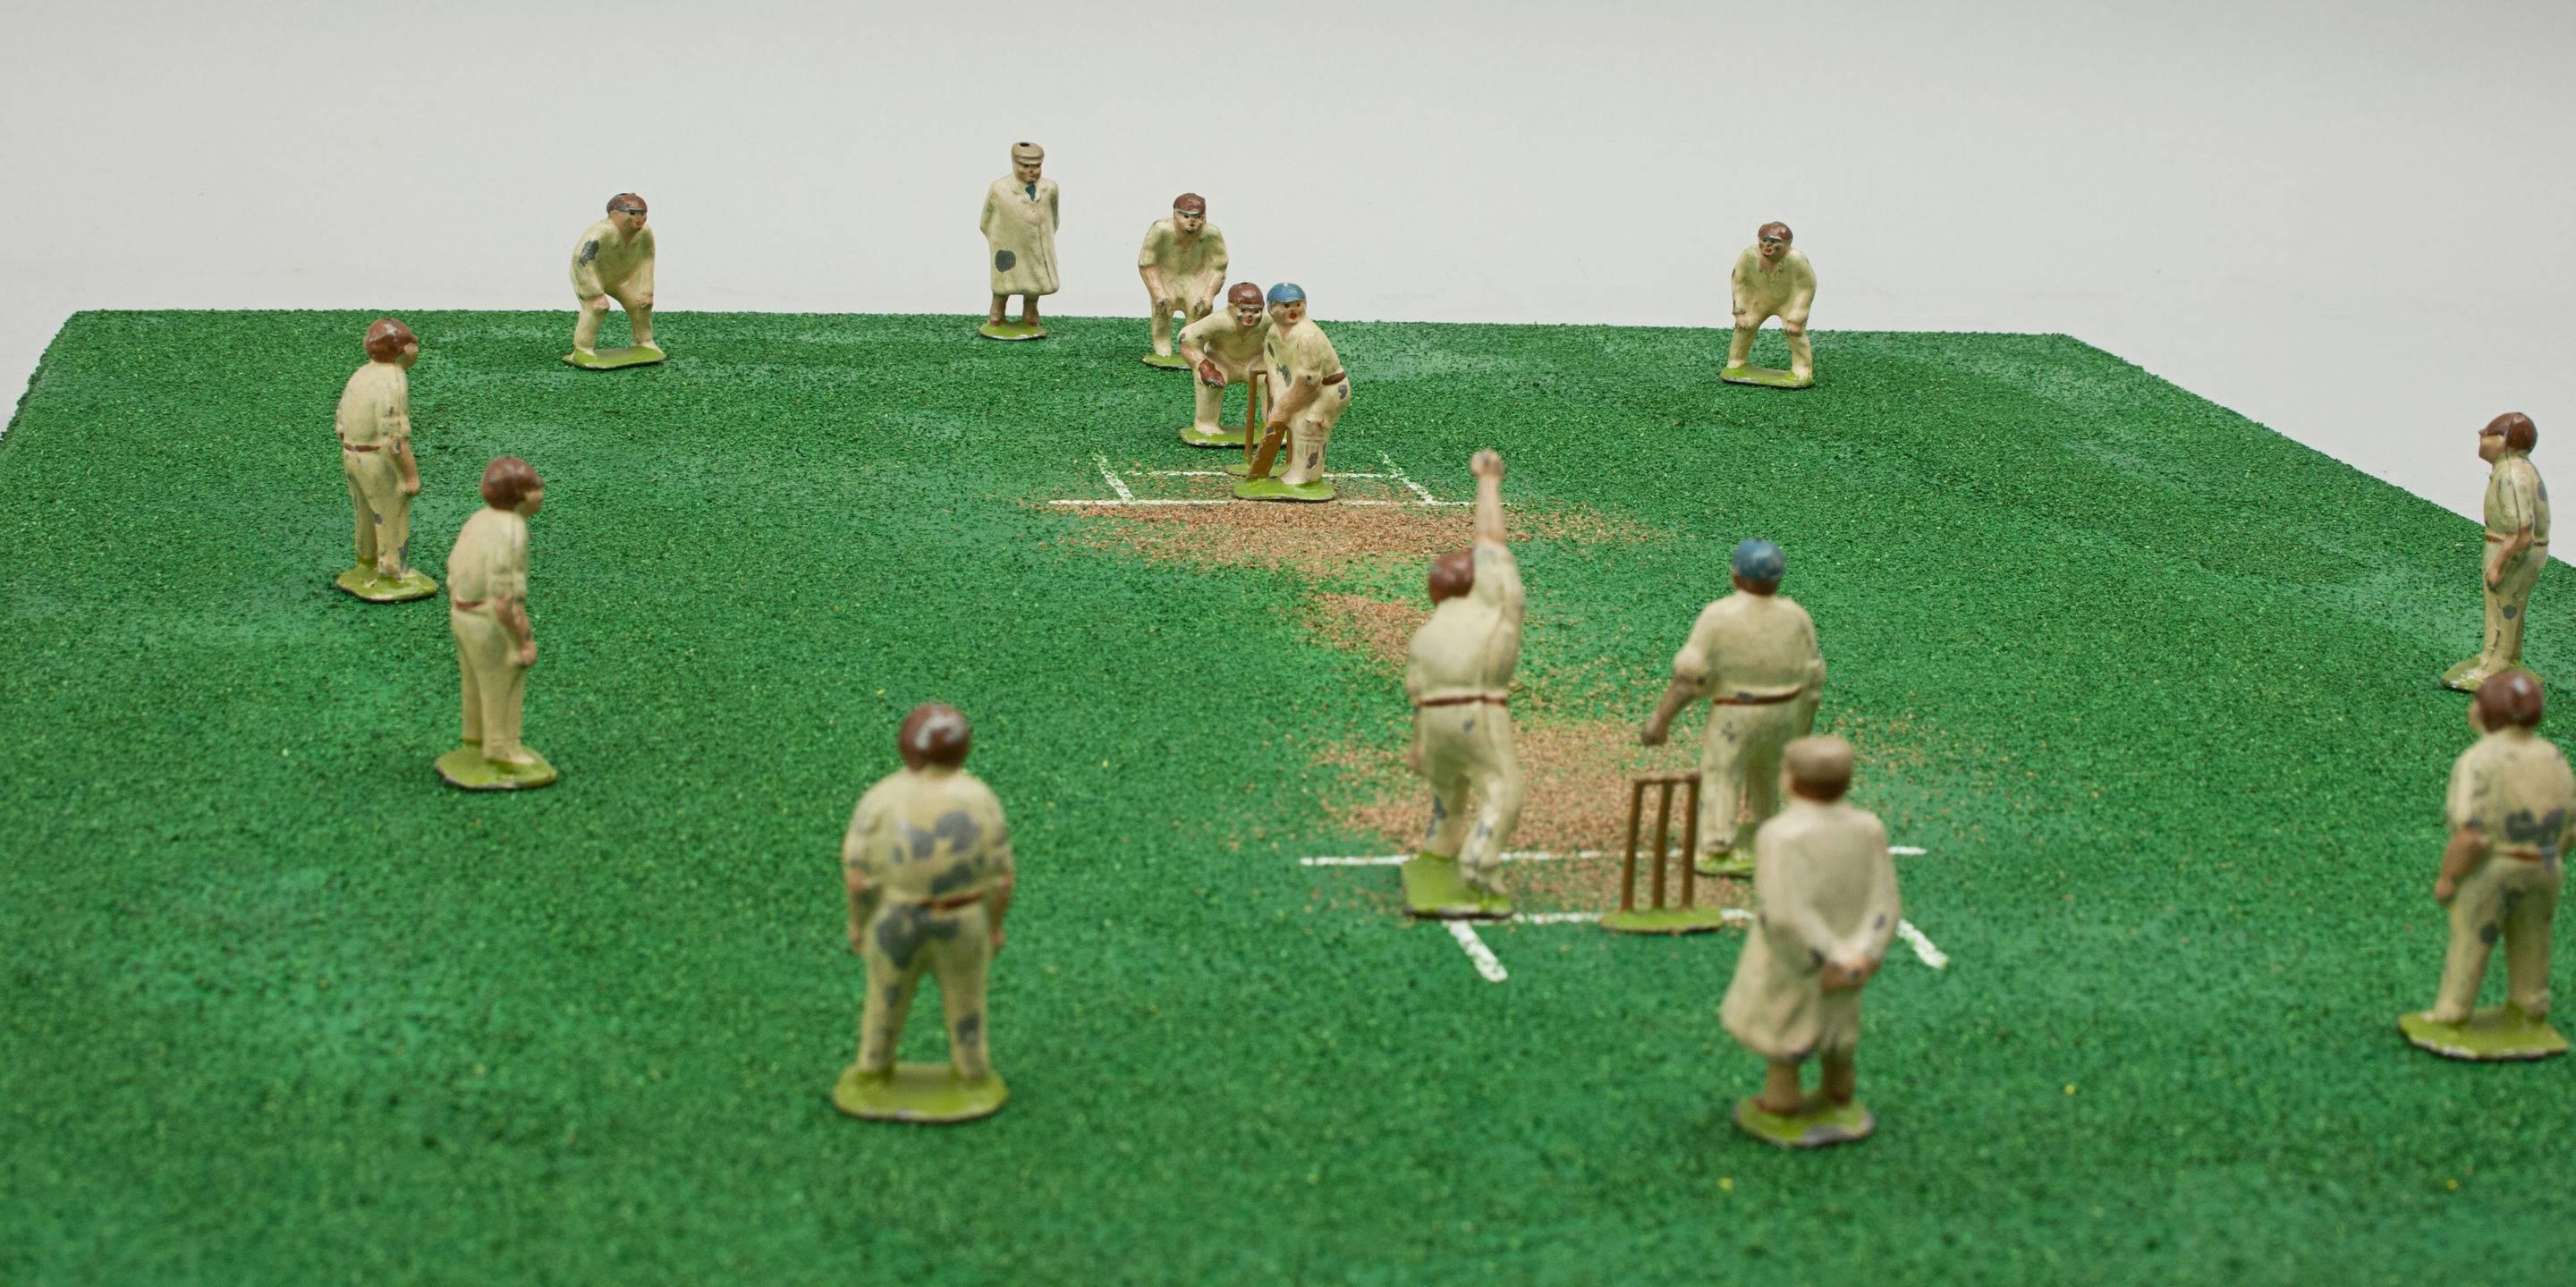 cricket players action figures